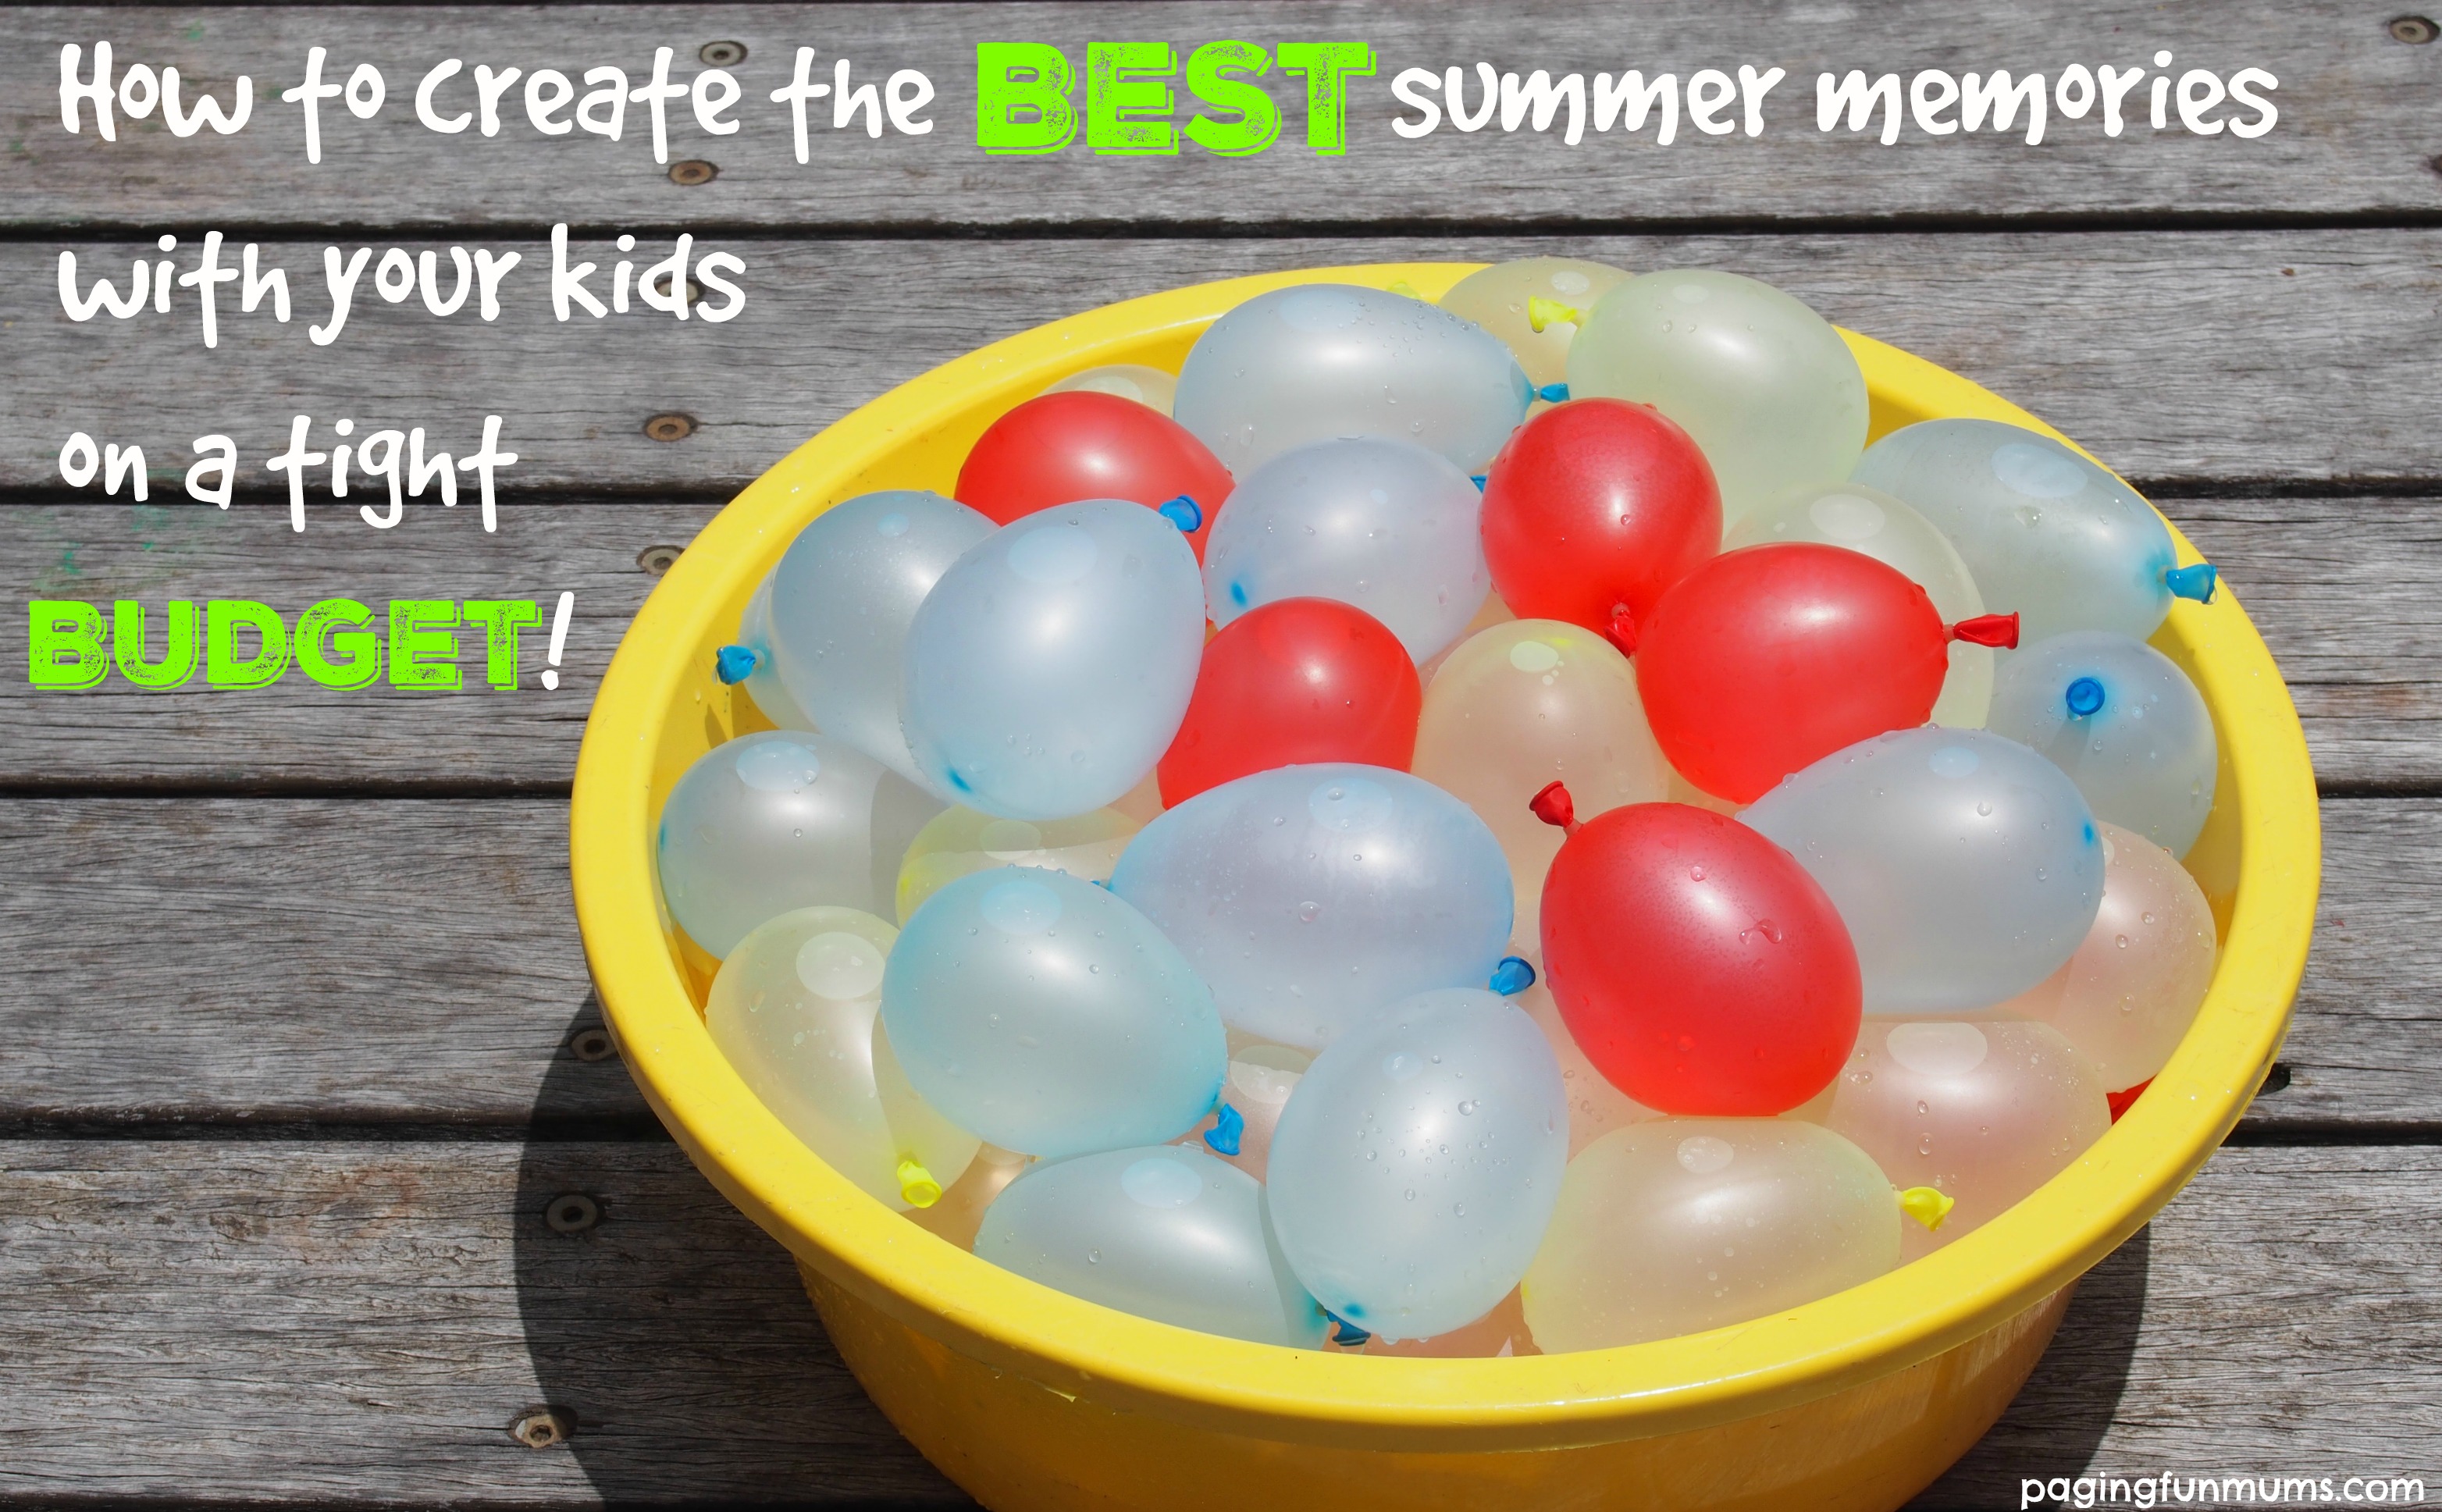 How to create the BEST summer memories with your kids on a tight budget!